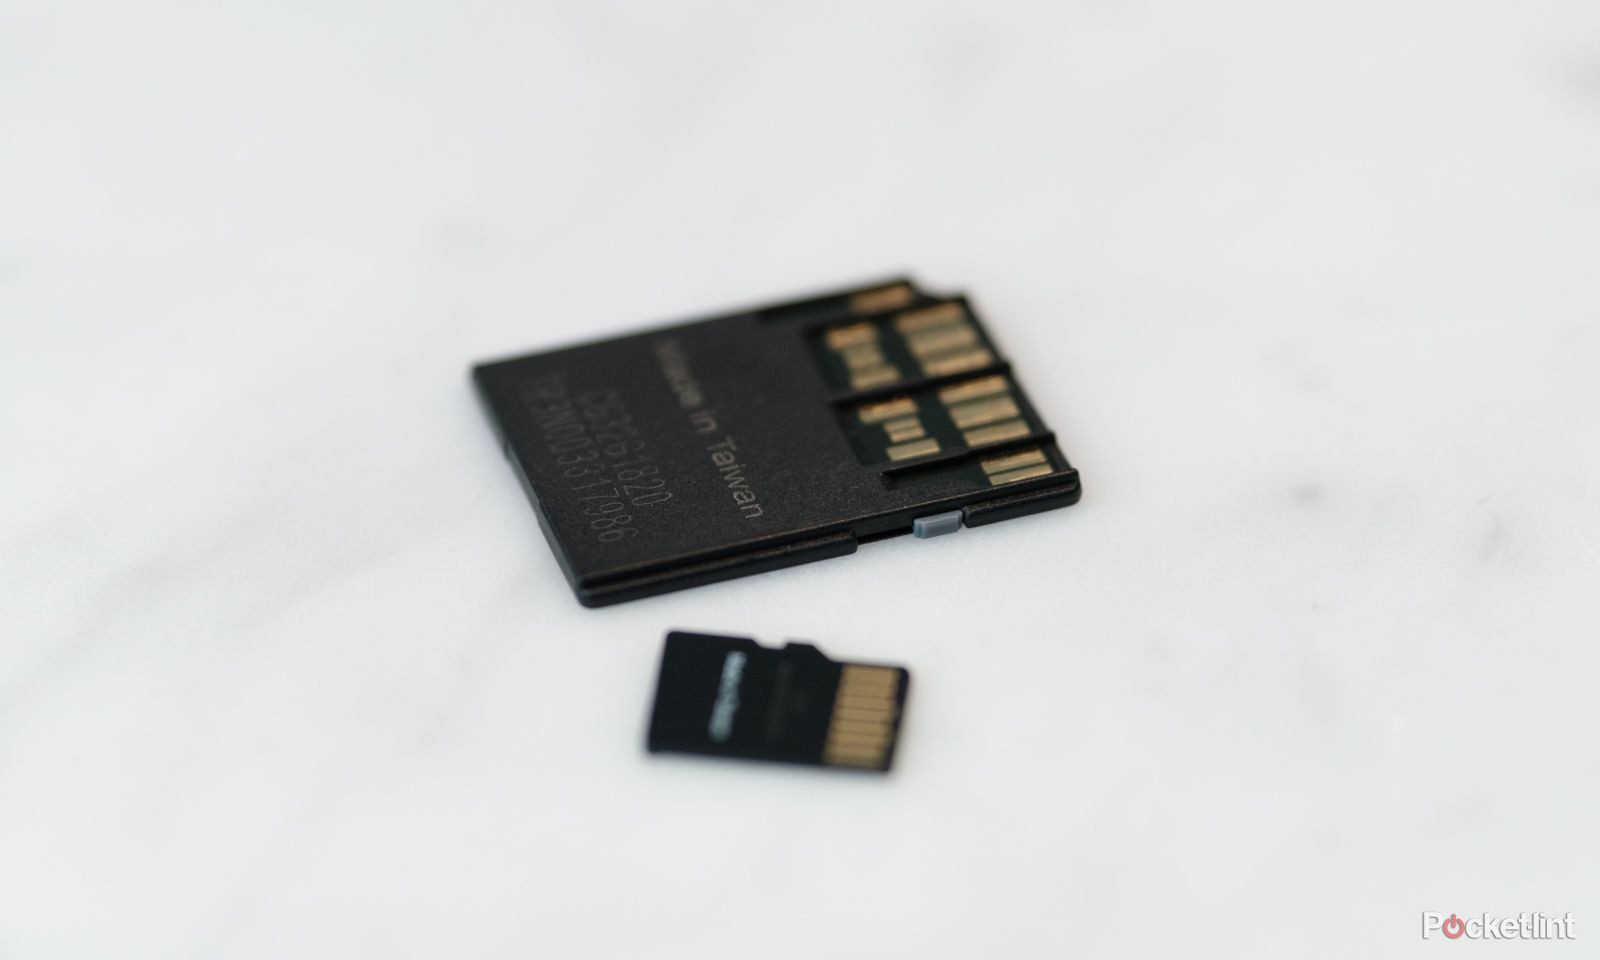 how-to-format-sd-cards-hillary-grigonis-pocket-lint-0022